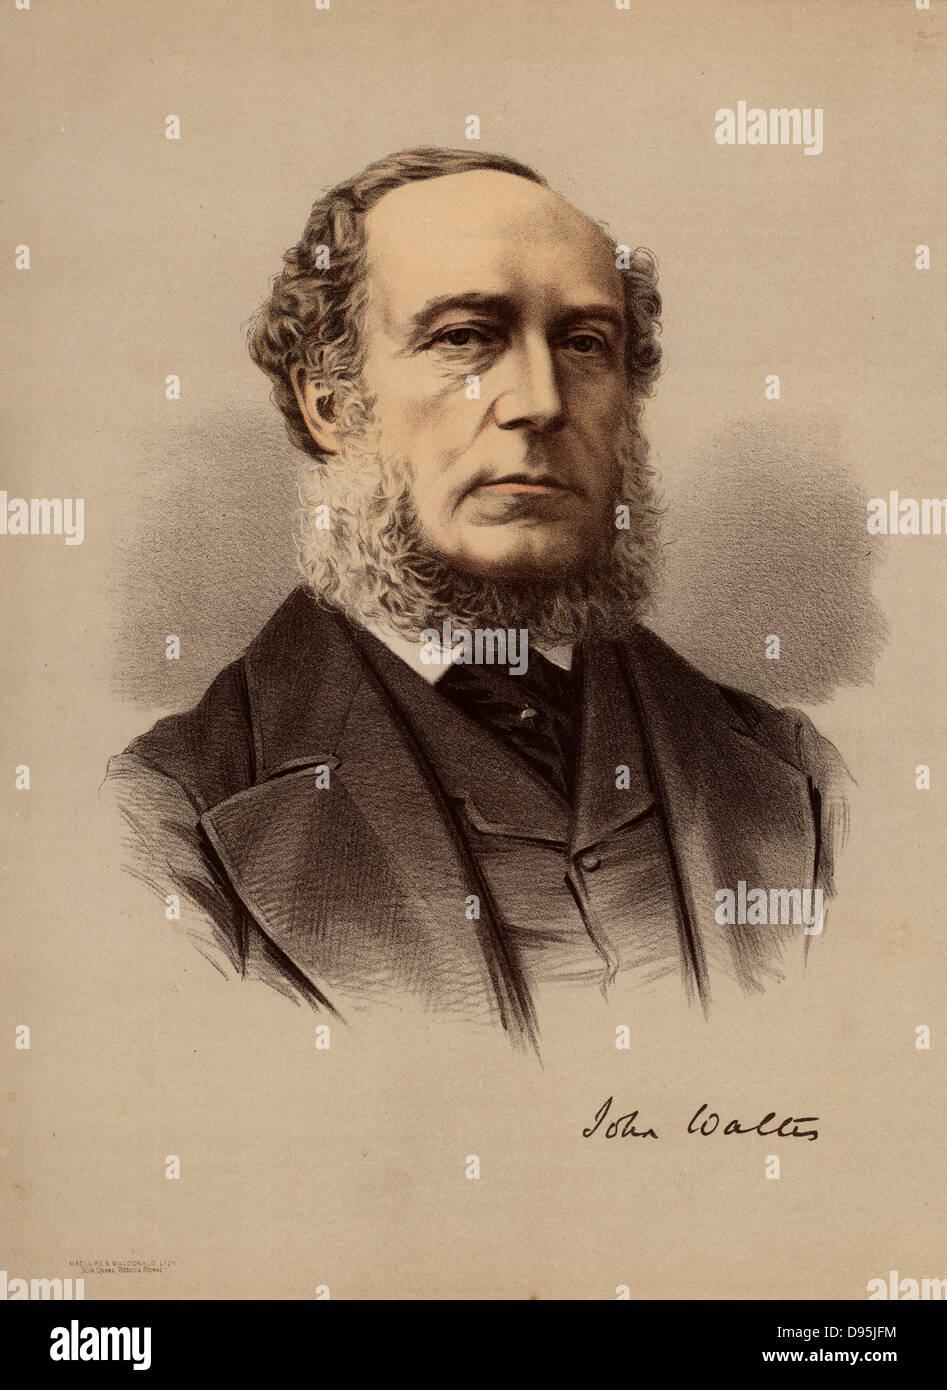 John Walter the Younger (1818-1894) English newspaper proprietor and politician. Chief proprietor of 'The Times', London. Introduced the Walter printing press in 1869. A Member of Parliament from 1845-1885.  From 'The Modern Portrait Gallery' (London, c1880). Stock Photo